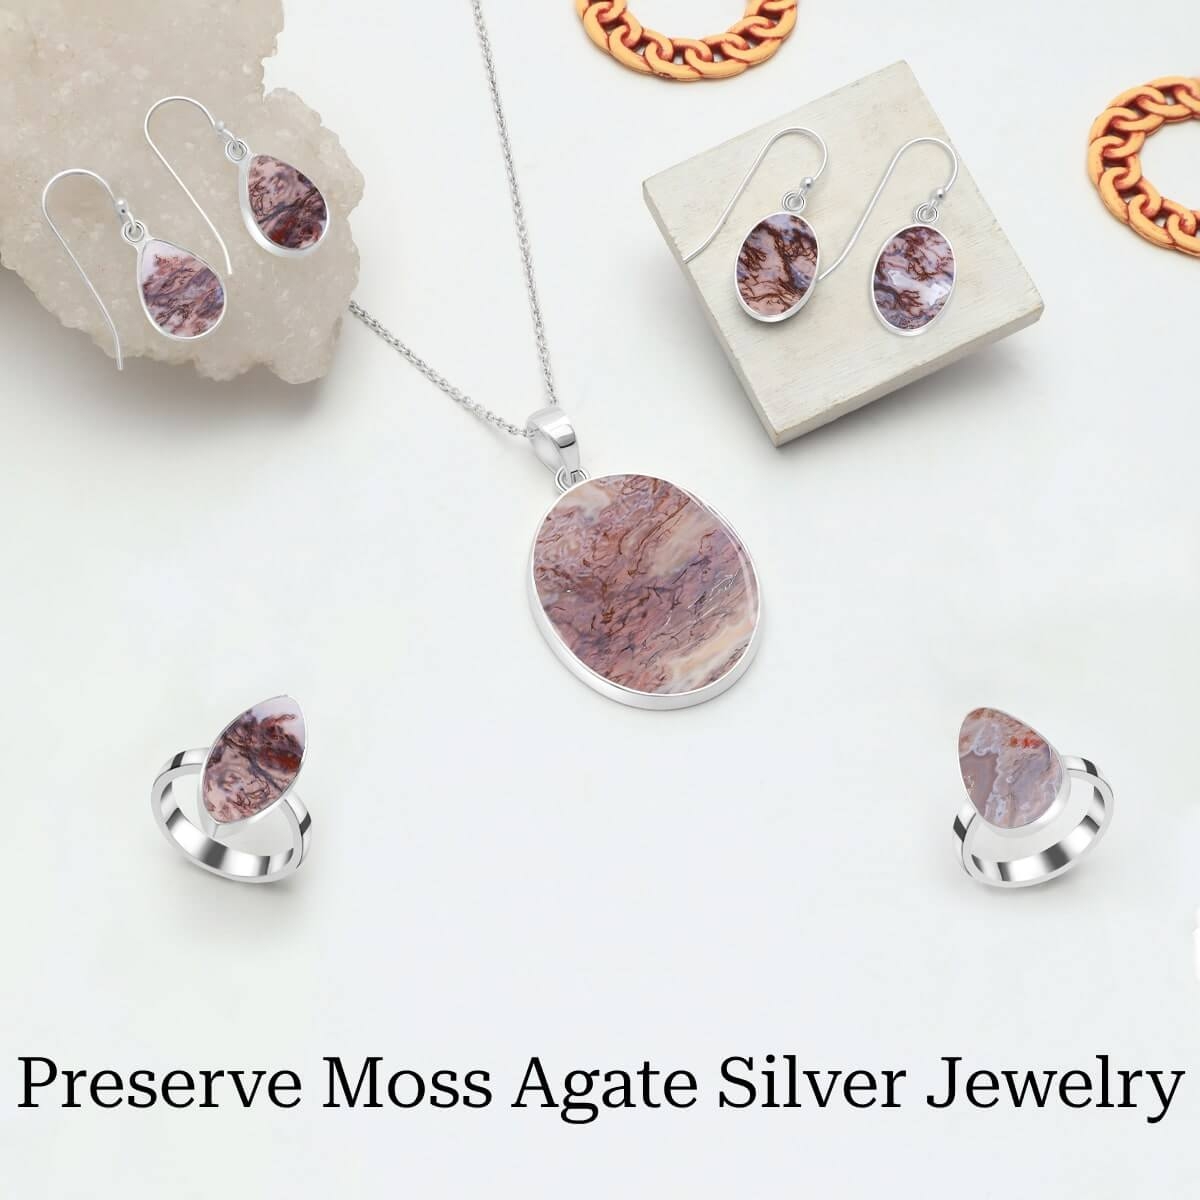 How to Care & Maintain The Moss Agate Plain Silver Jewelry